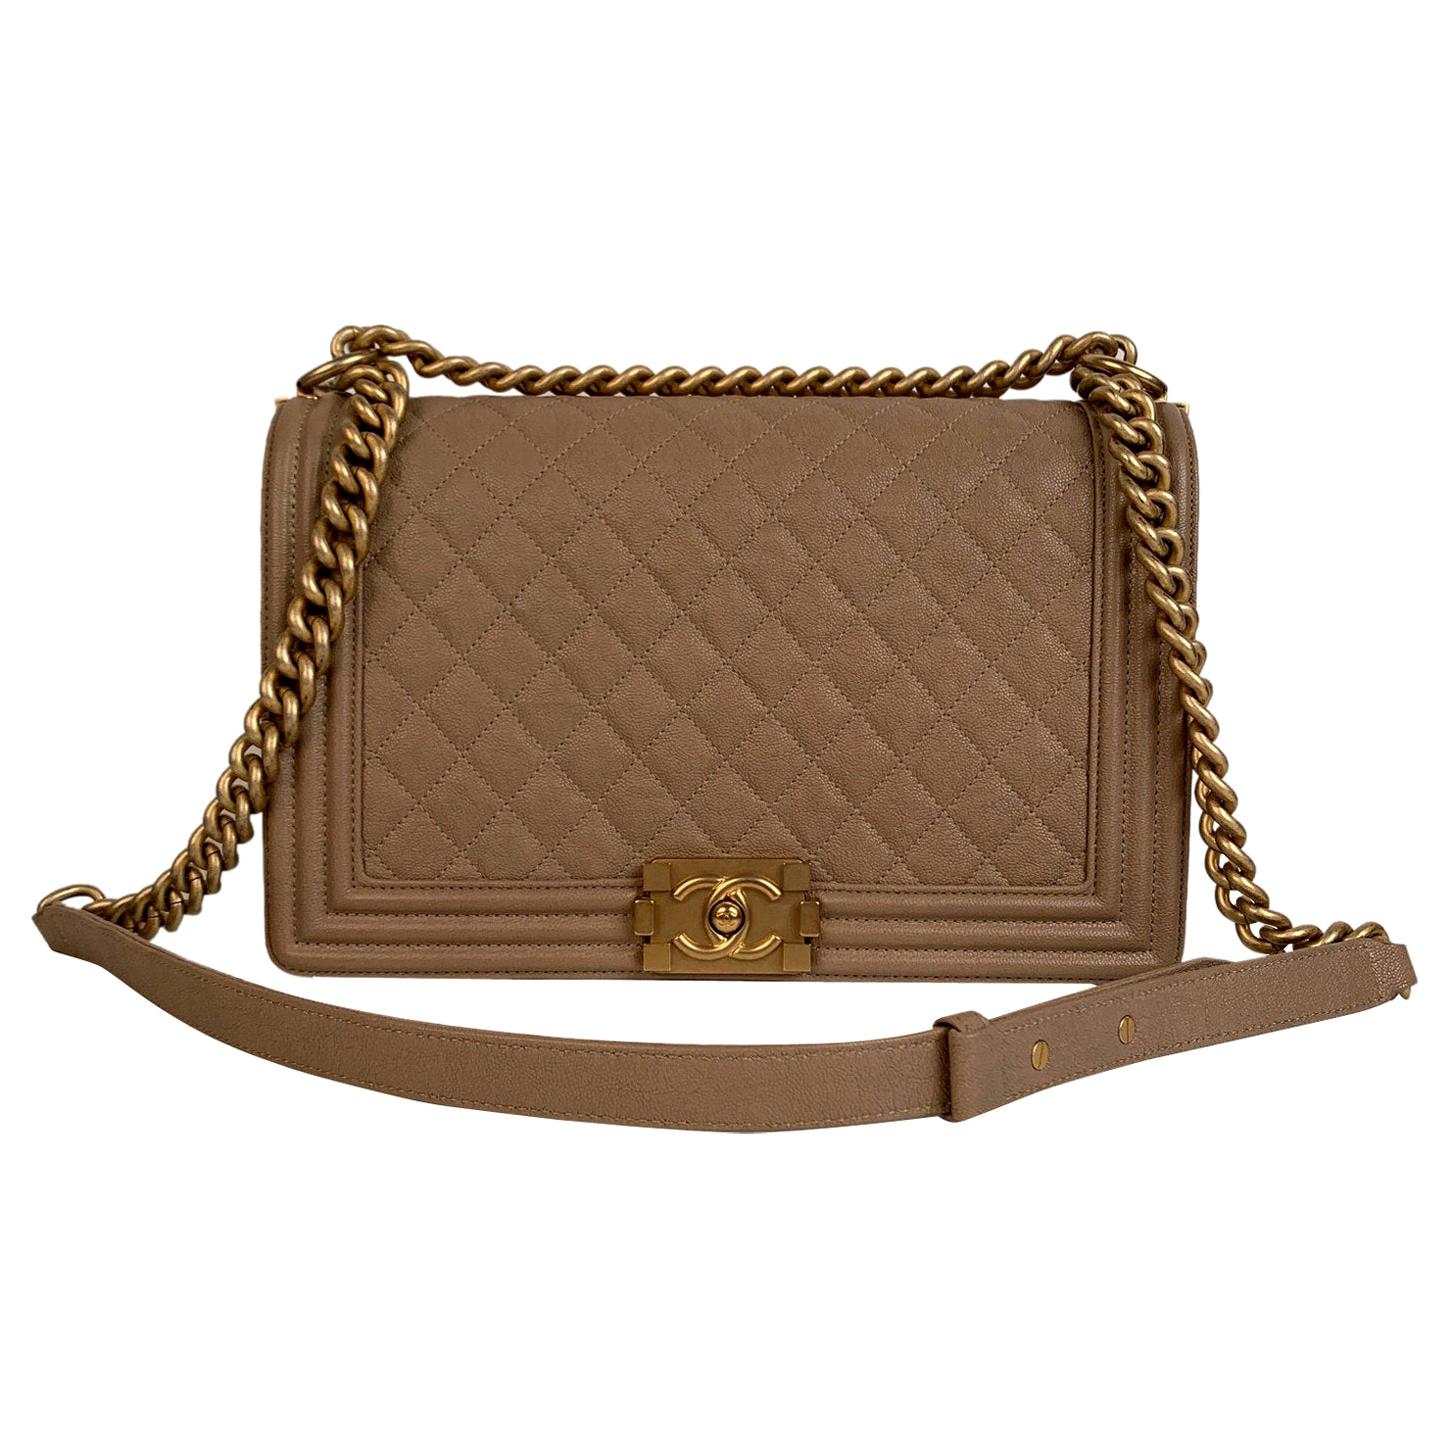 Chanel Nude Quilted Caviar Leather Large Boy Shoulder Bag